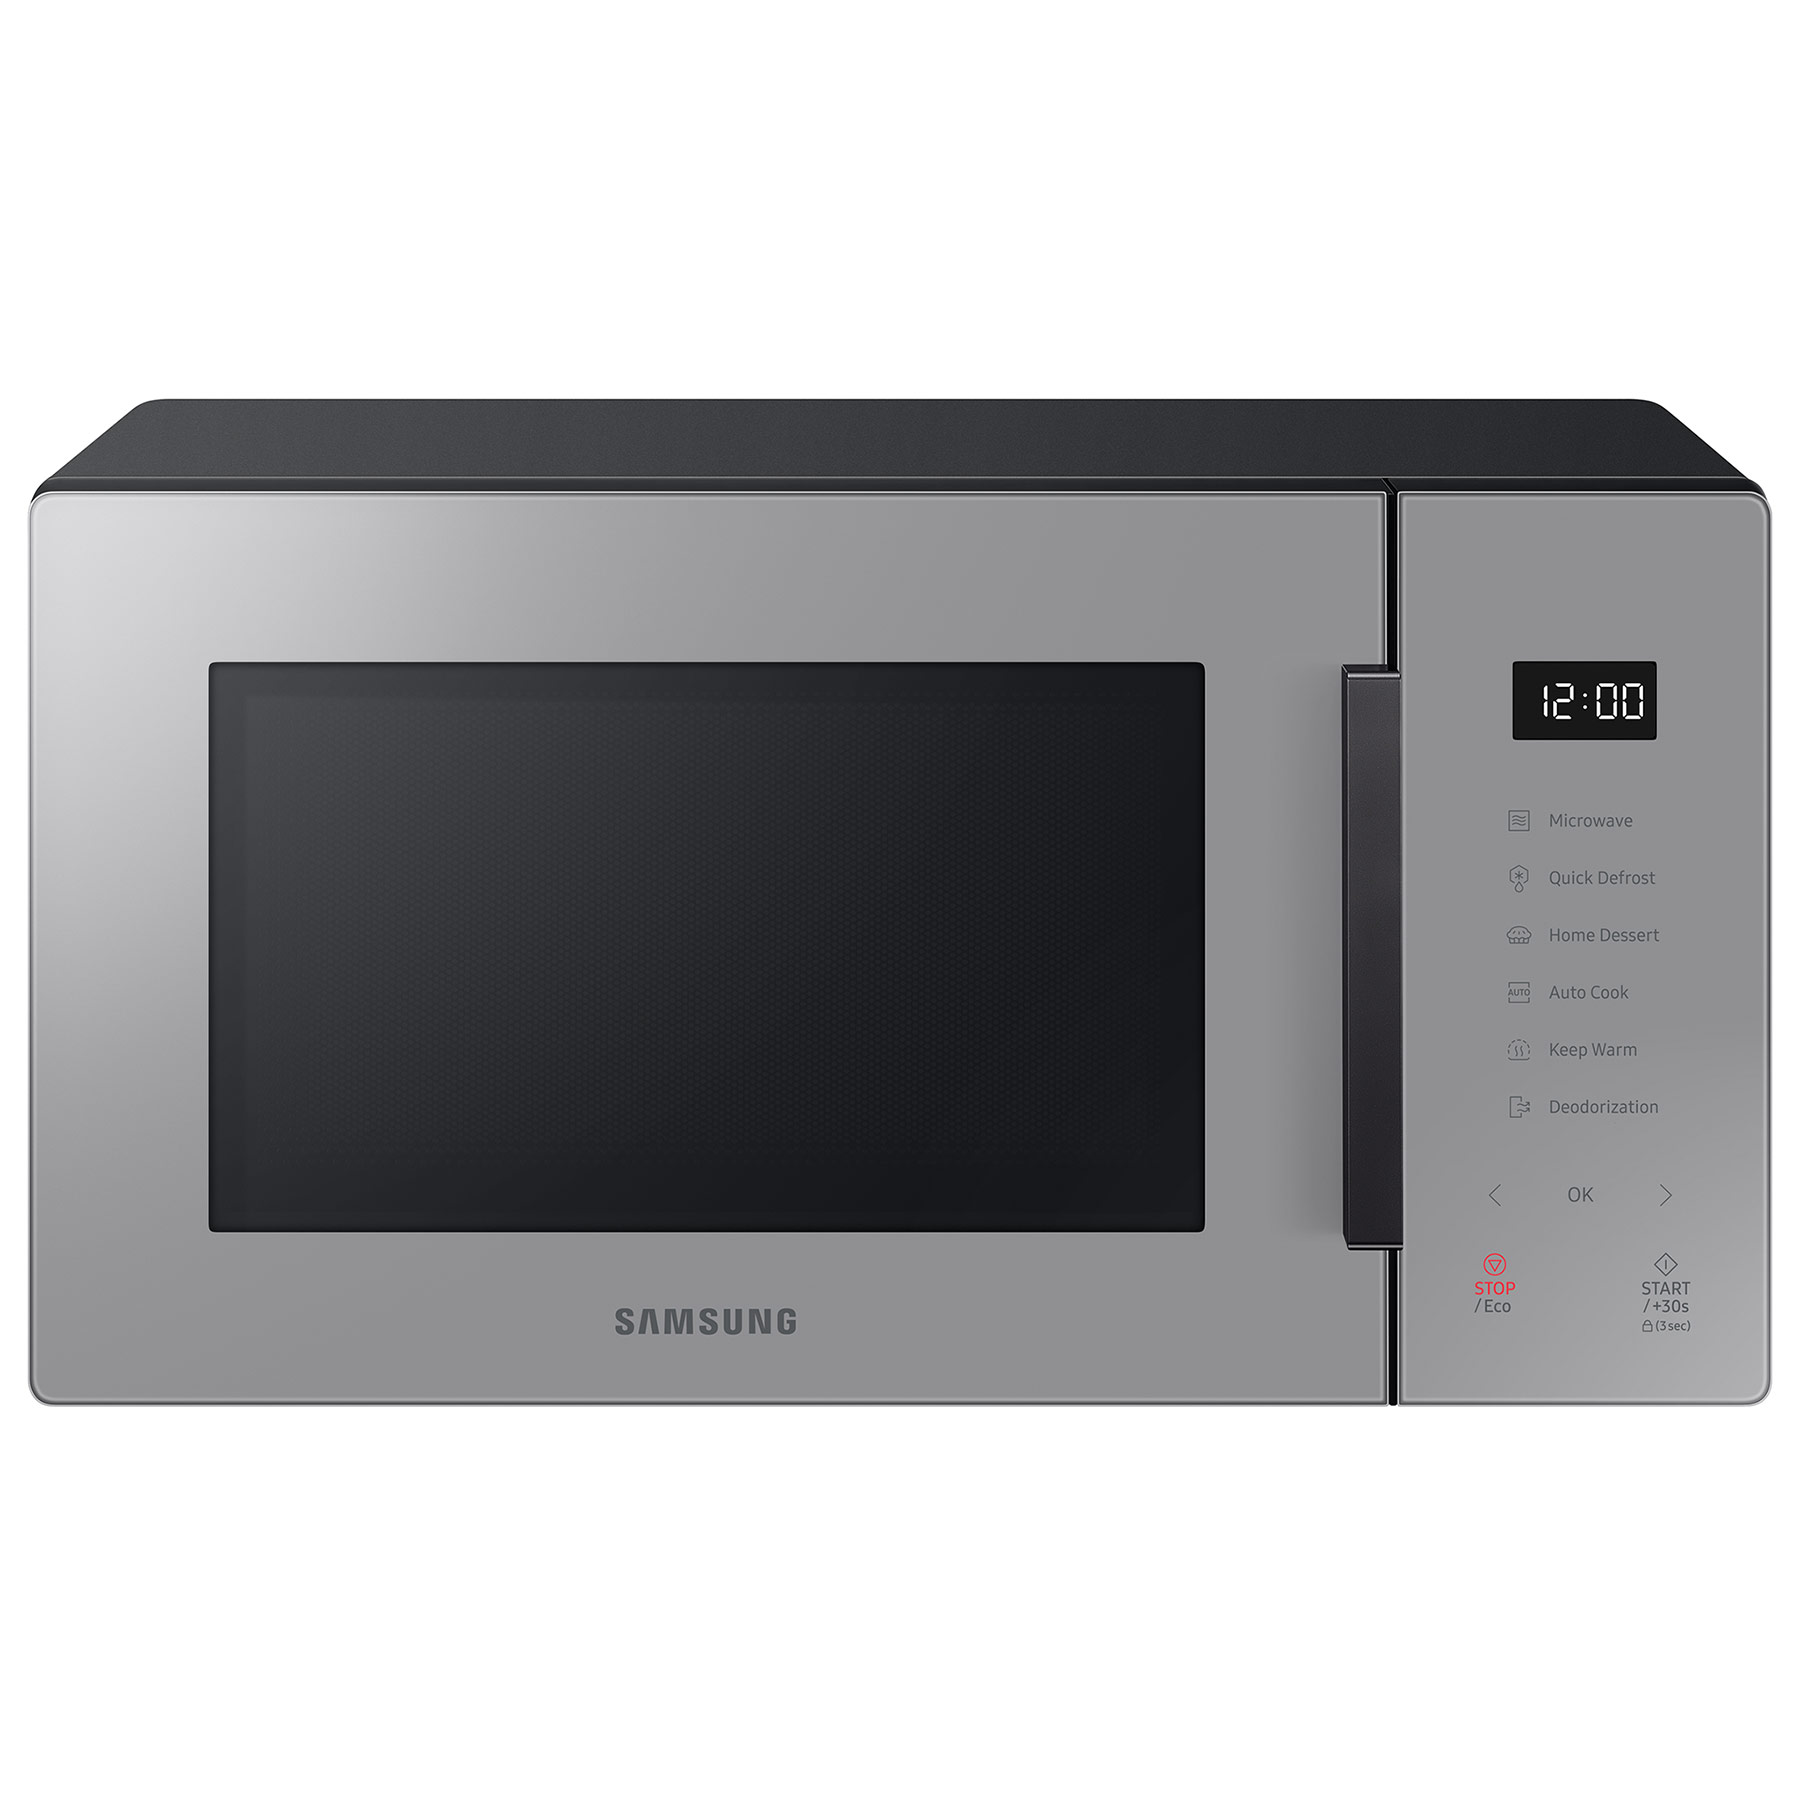 Image of Samsung MS23T5018AG Microwave Oven in Grey 23 Litre 800W 20 Prog